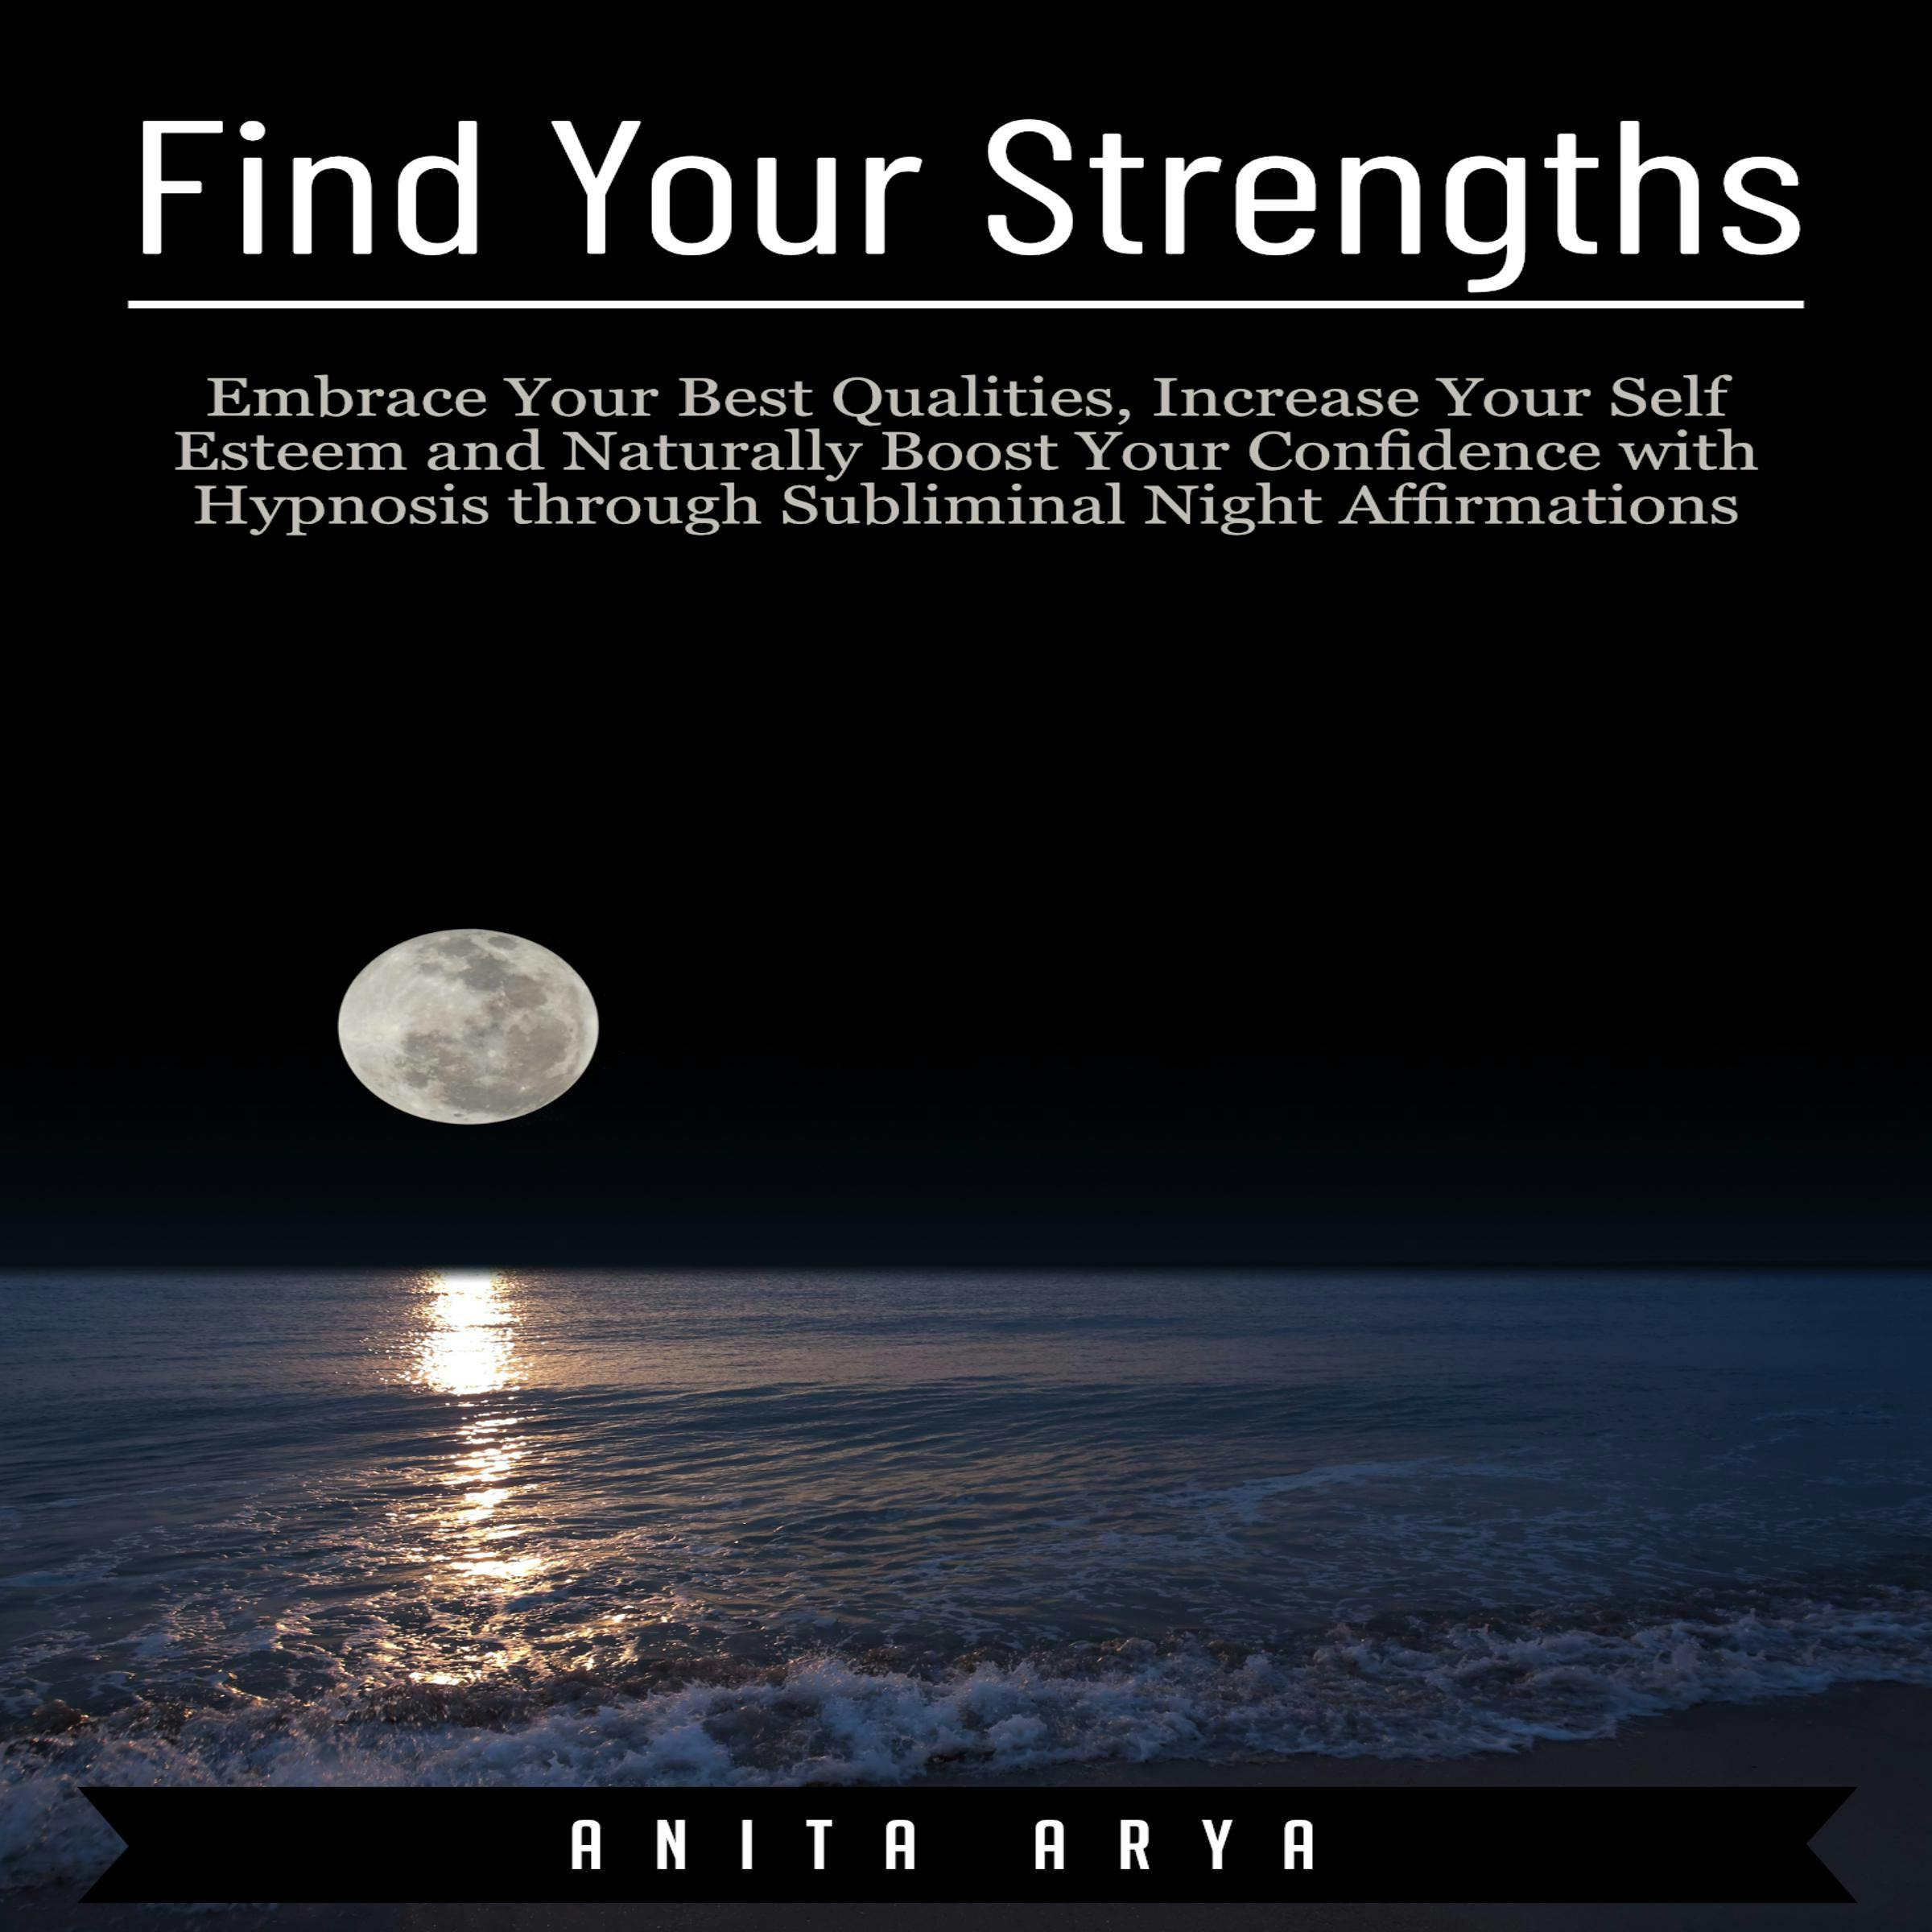 Find Your Strengths: Embrace Your Best Qualities, Increase Your Self Esteem and Naturally Boost Your Confidence with Hypnosis through Subliminal Night Affirmations - Anita Arya